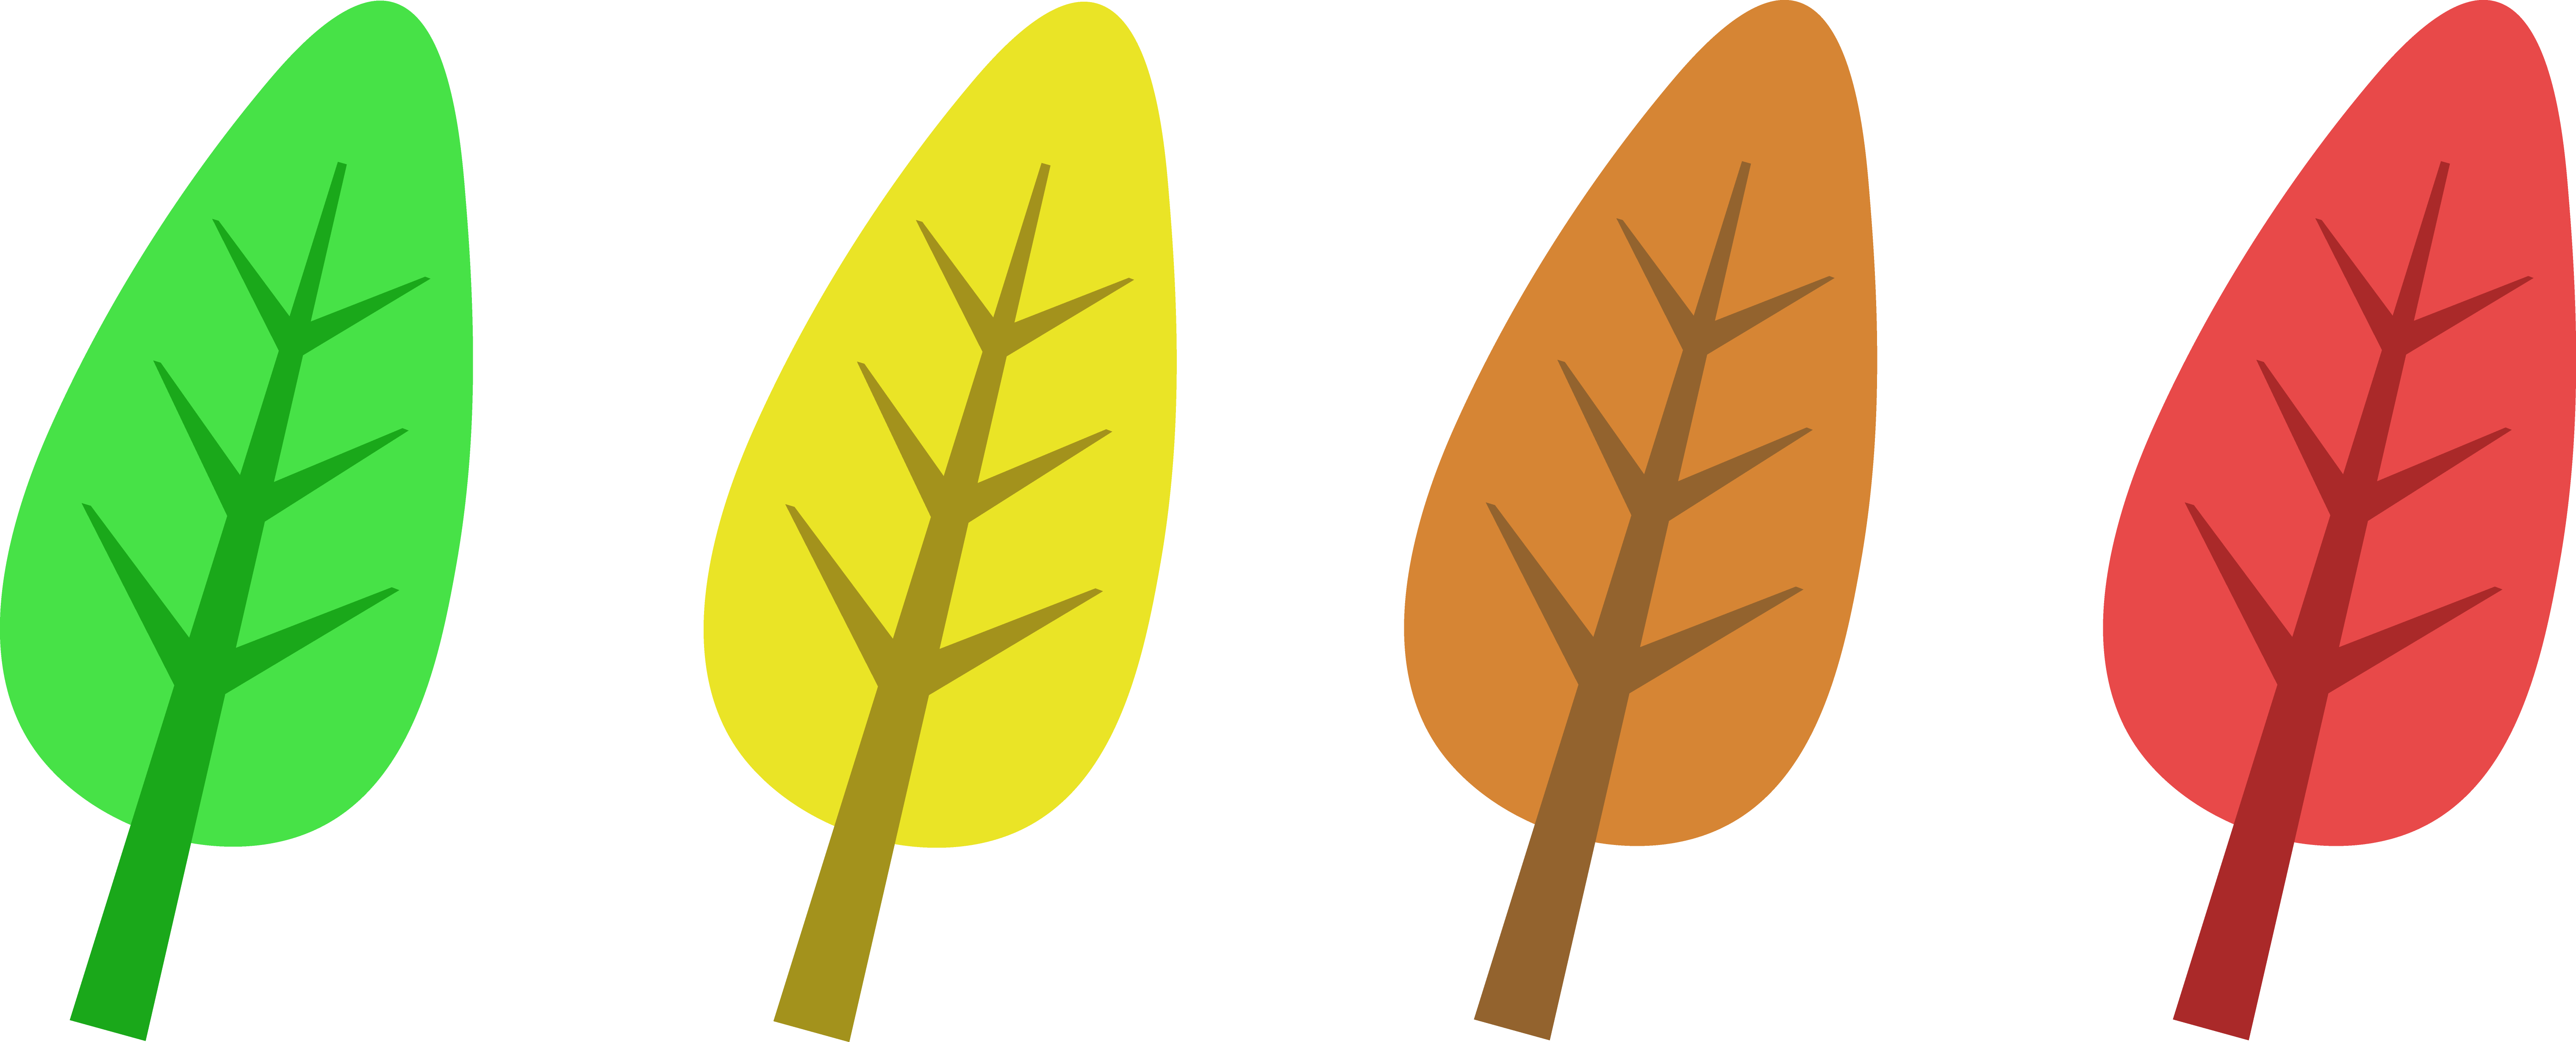 Leaf free leaves clipart free clipart graphics images and photos 2 4